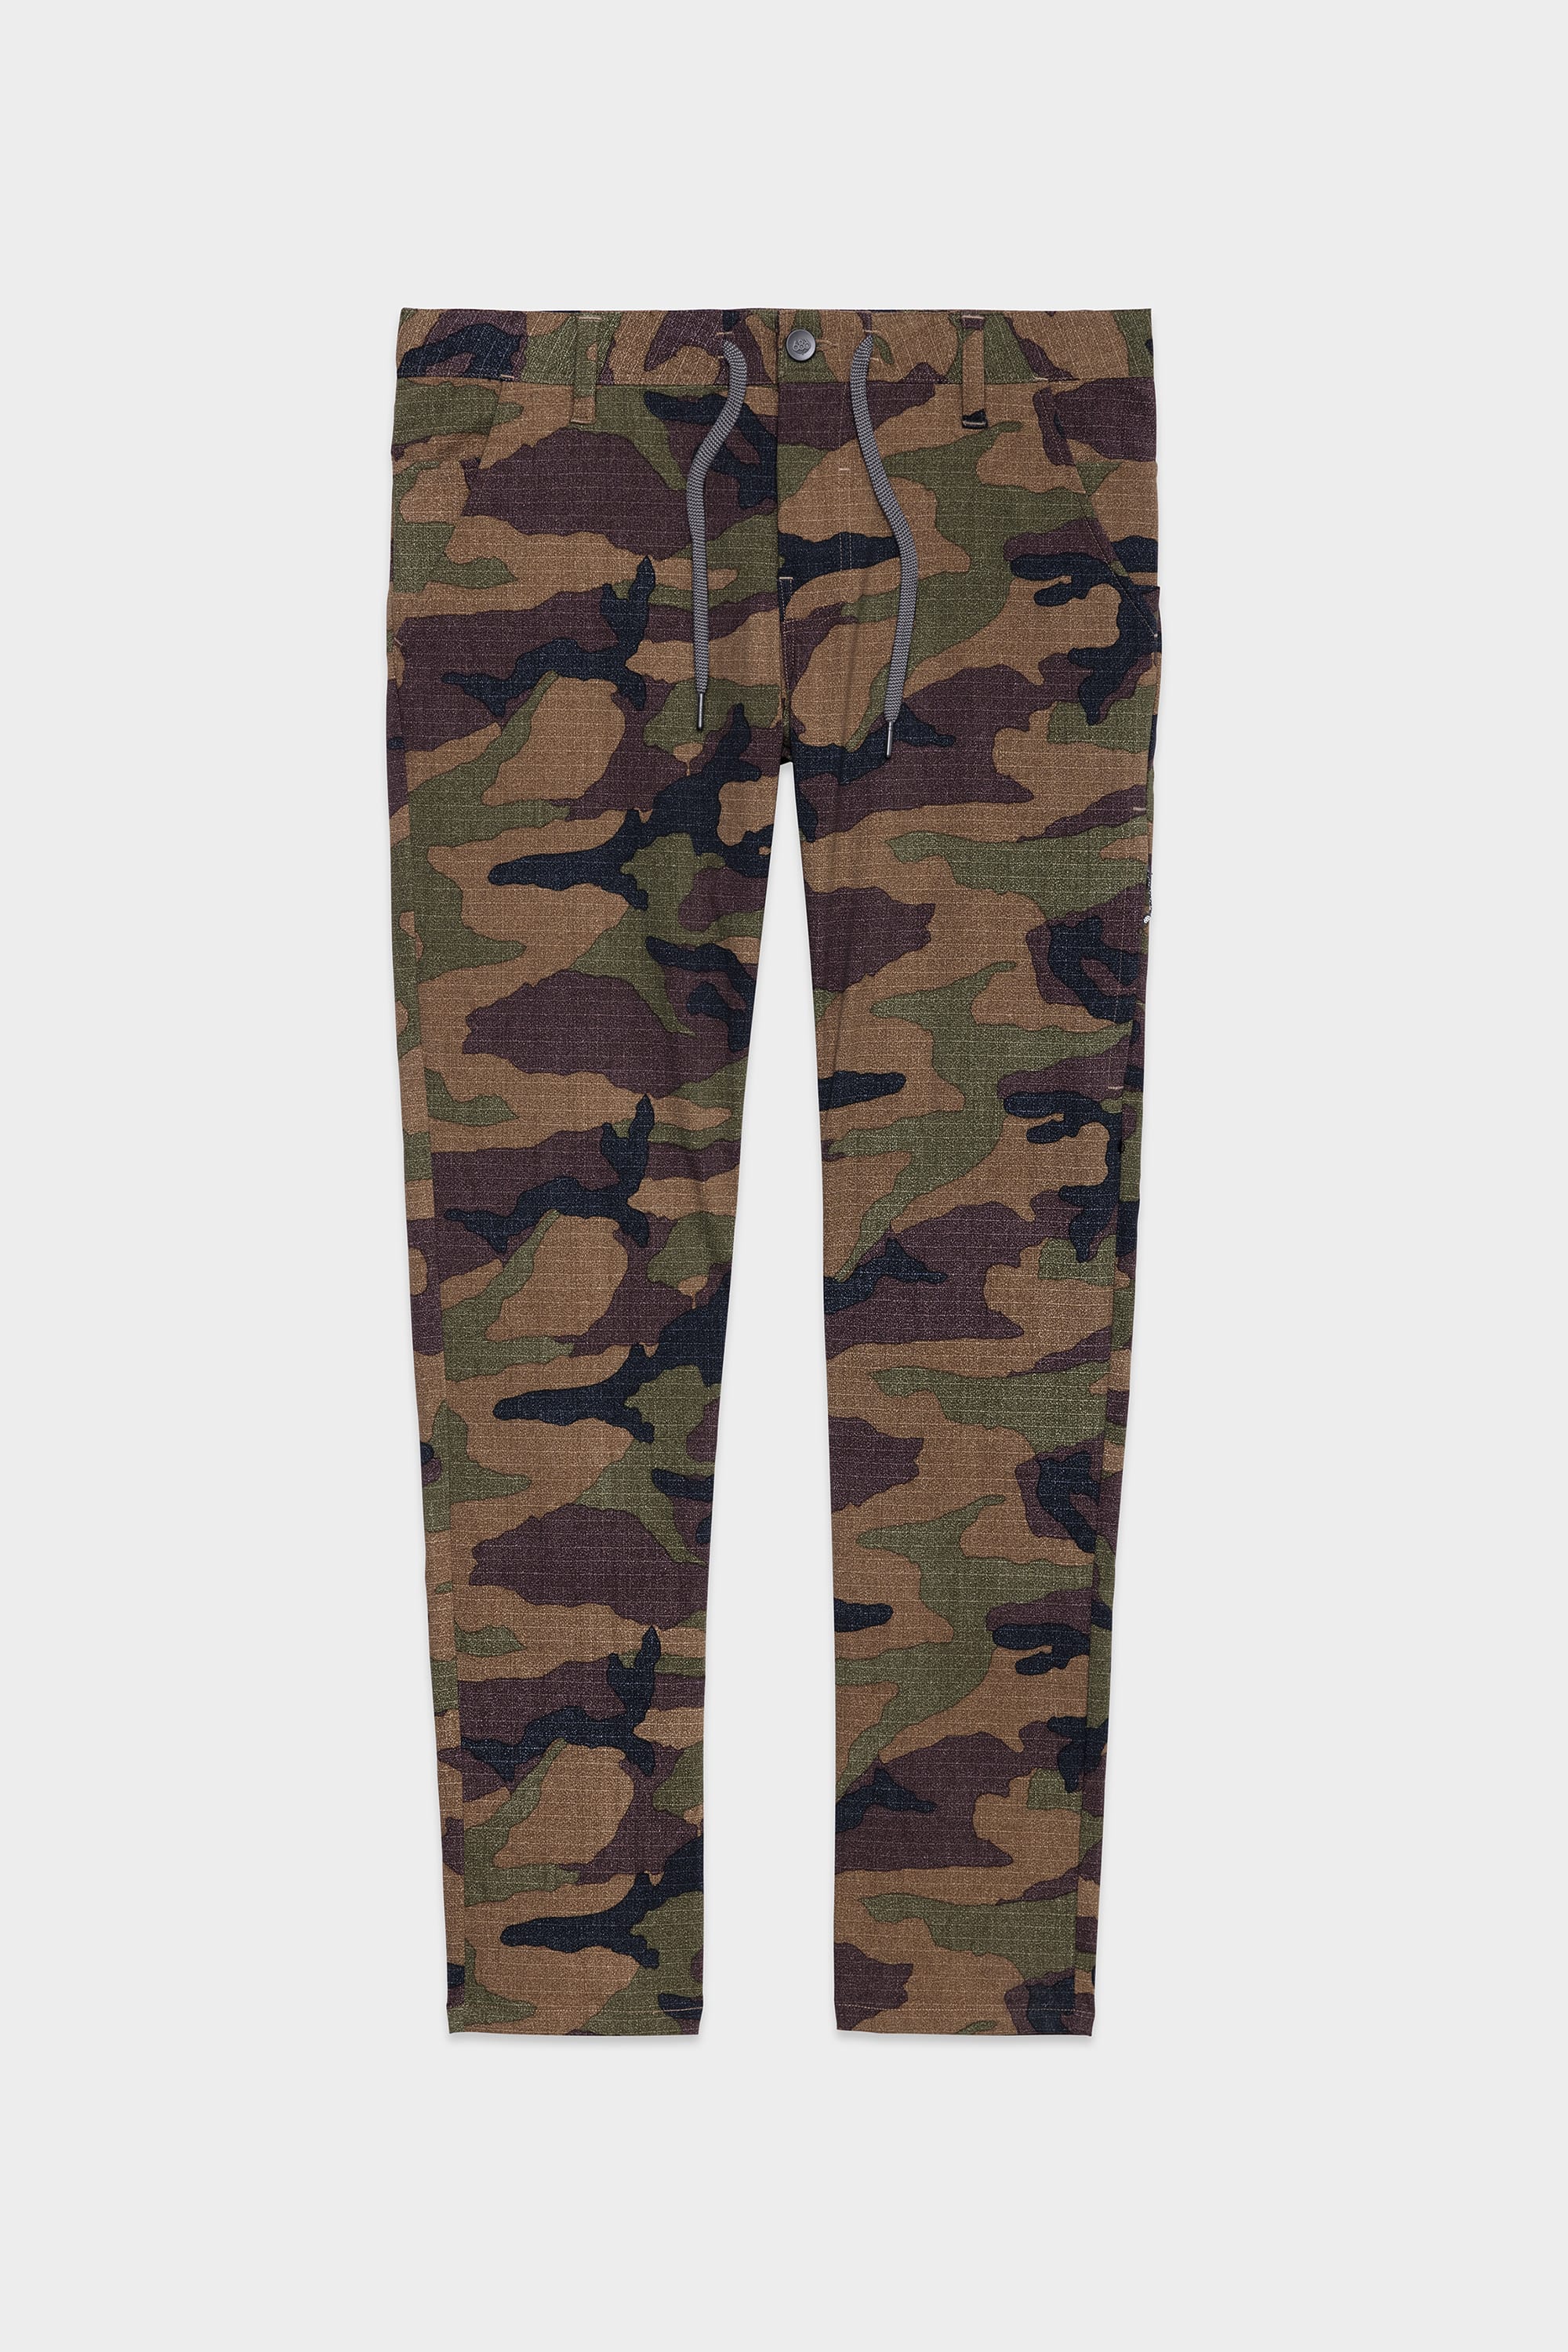 Camouflage Cargo Trousers  Buy Camouflage Cargo Trousers online in India